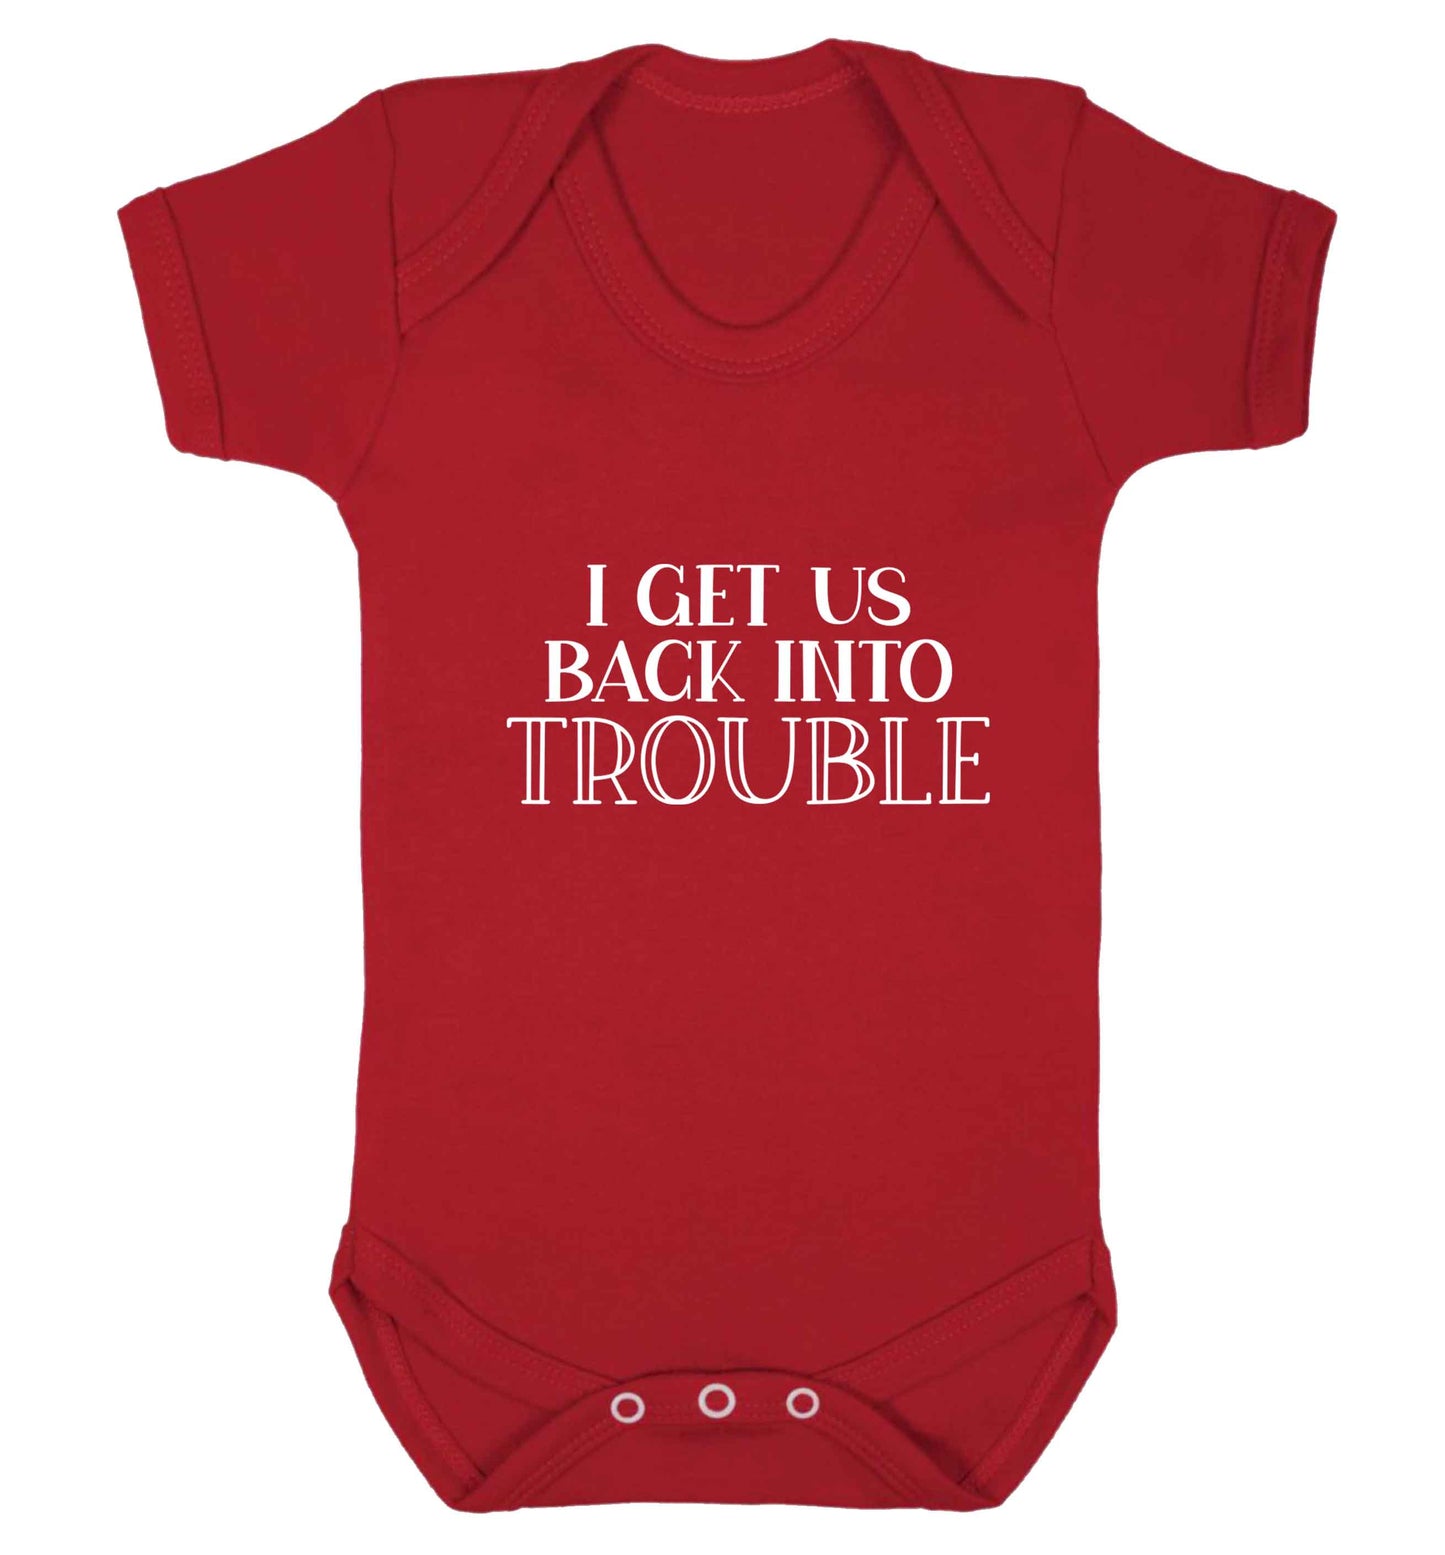 I get us back into trouble baby vest red 18-24 months